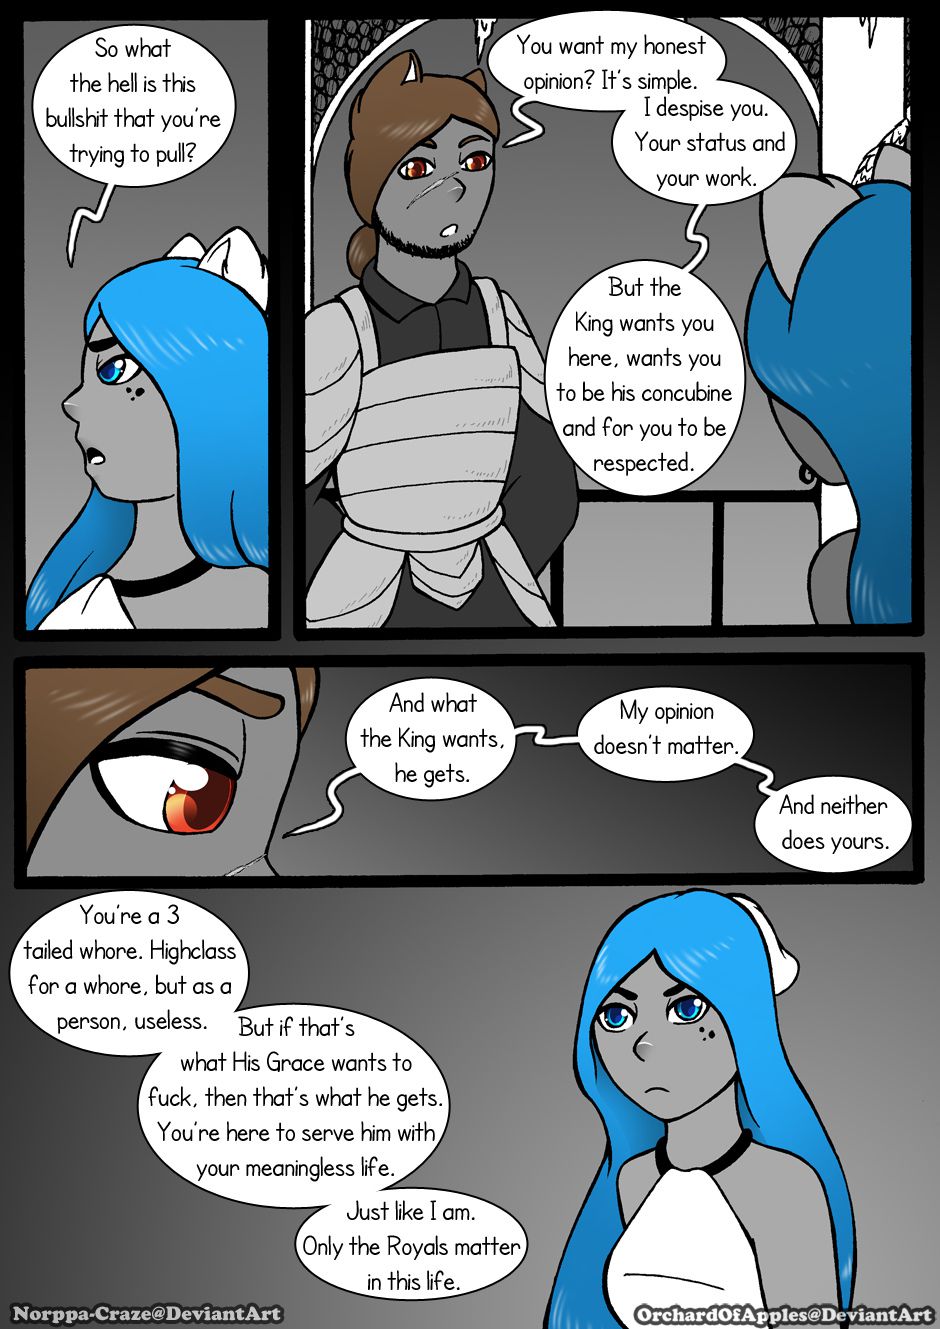 [Jeny-jen94] Between Kings and Queens [Ongoing] 250